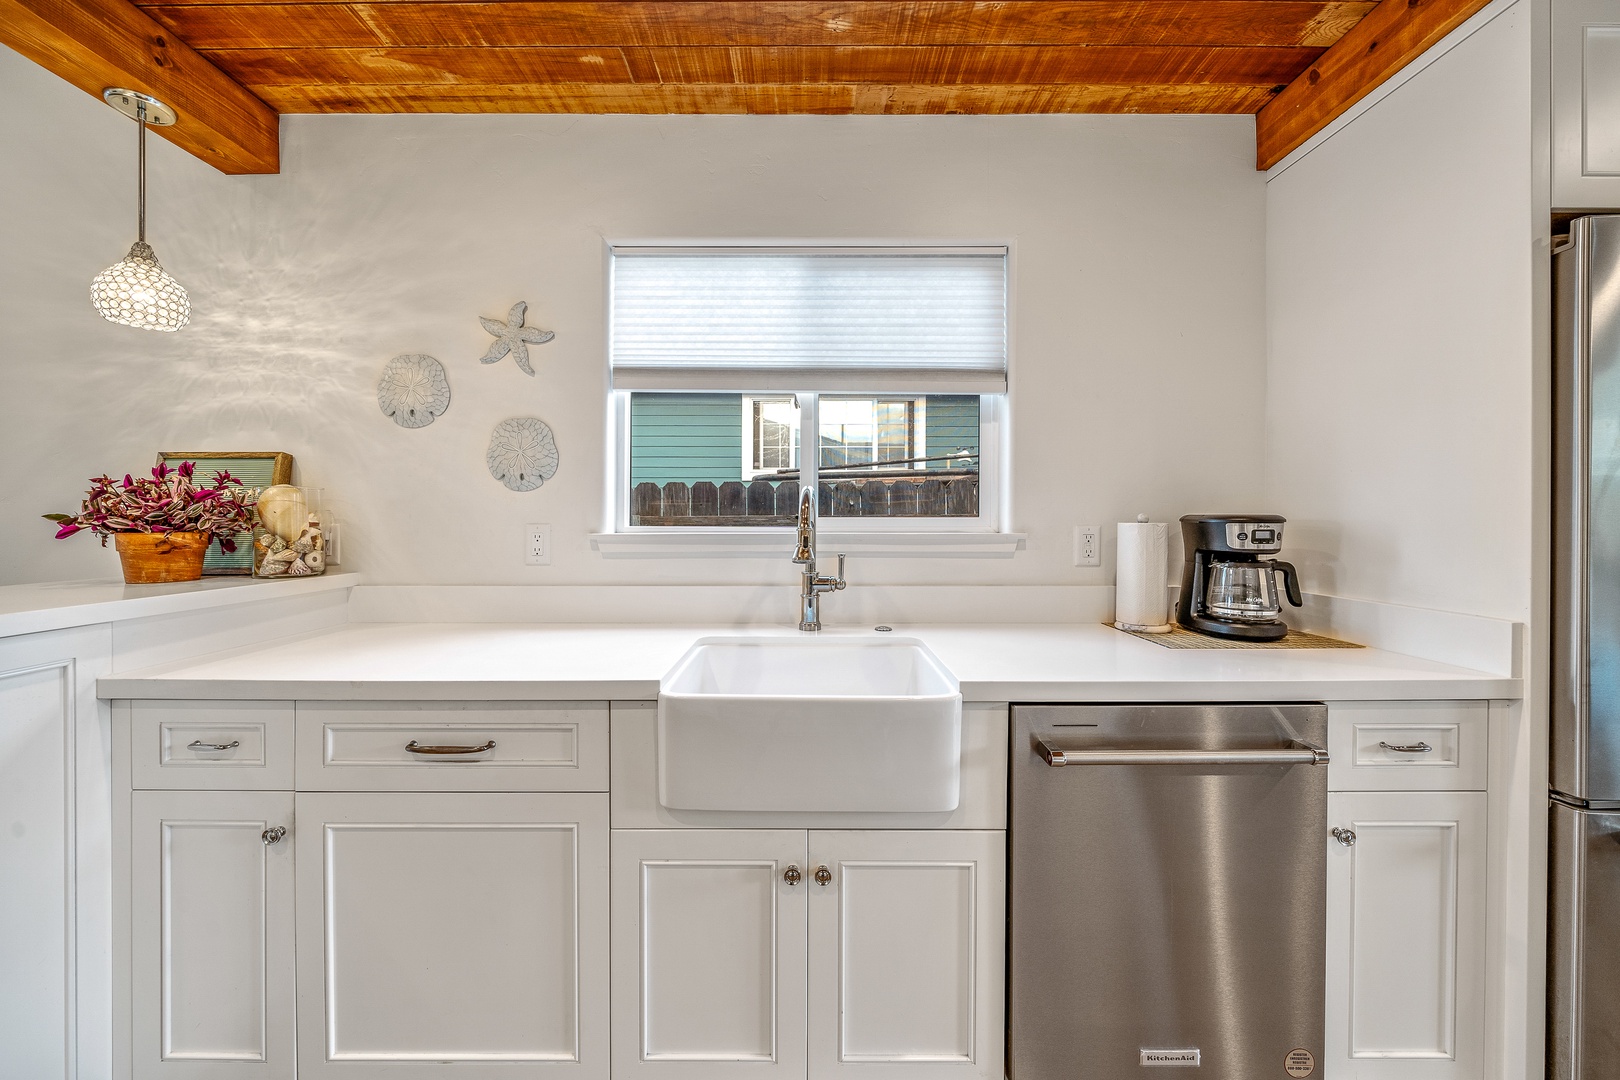 The gleaming coastal kitchen is spacious & offers all the comforts of home